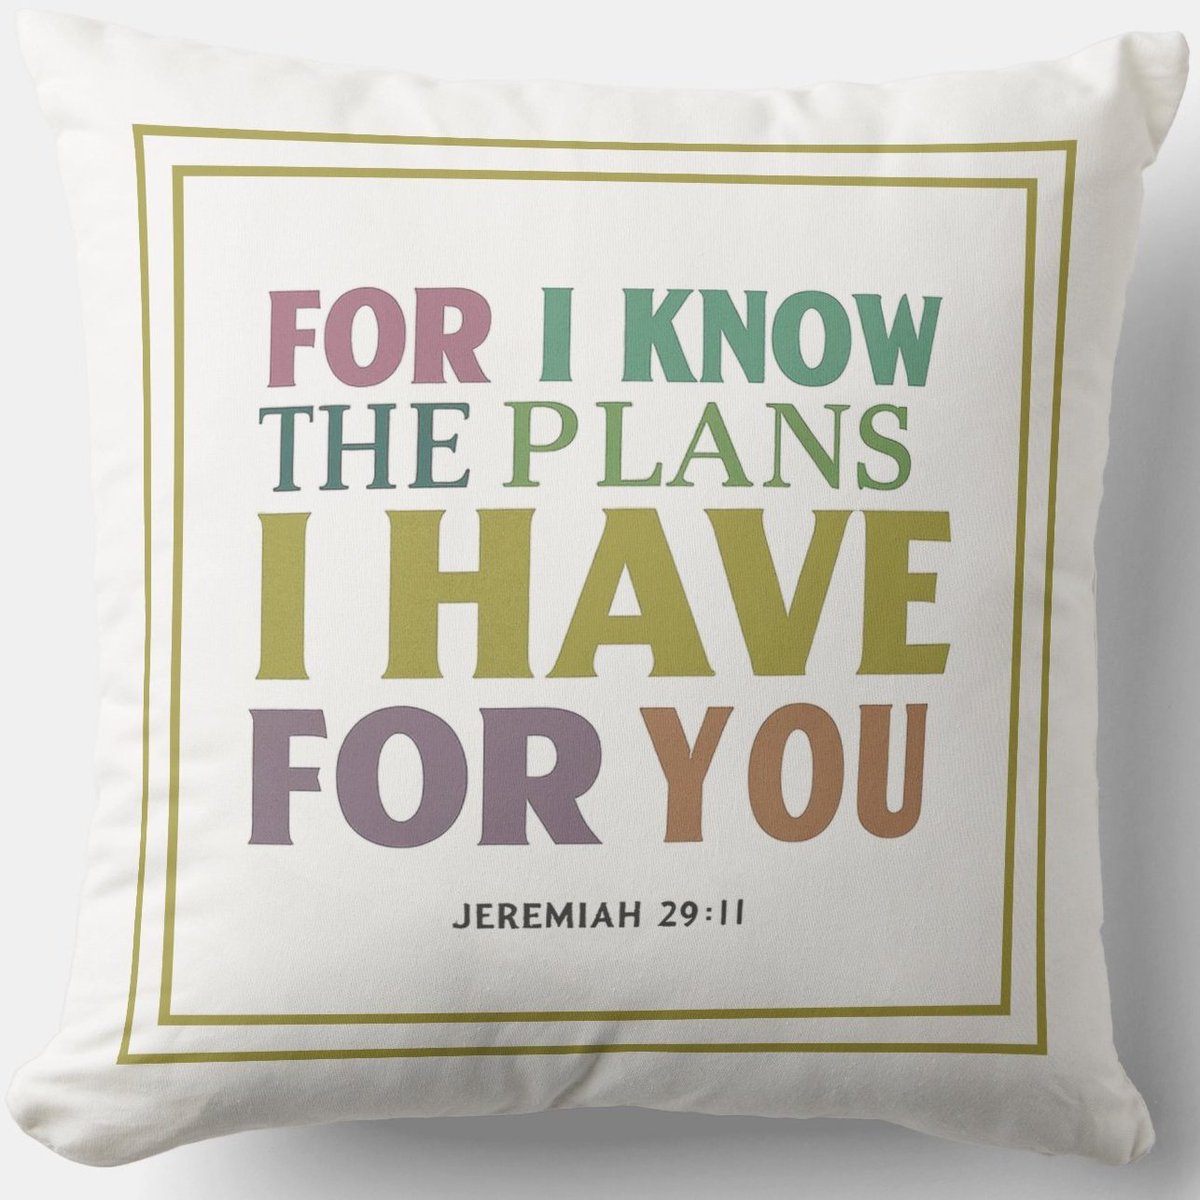 For I Know The Plans I Have For You zazzle.com/for_i_know_the… Jeremiah 29:11 #Pillow #JesusChrist #JesusSaves #Jesus #hope #god #christian #spiritual #Homedecoration #uniquegift #giftideas #MothersDayGifts #giftformom #giftidea #HolySpirit #pillows #gift #giftsforher #giftsformom